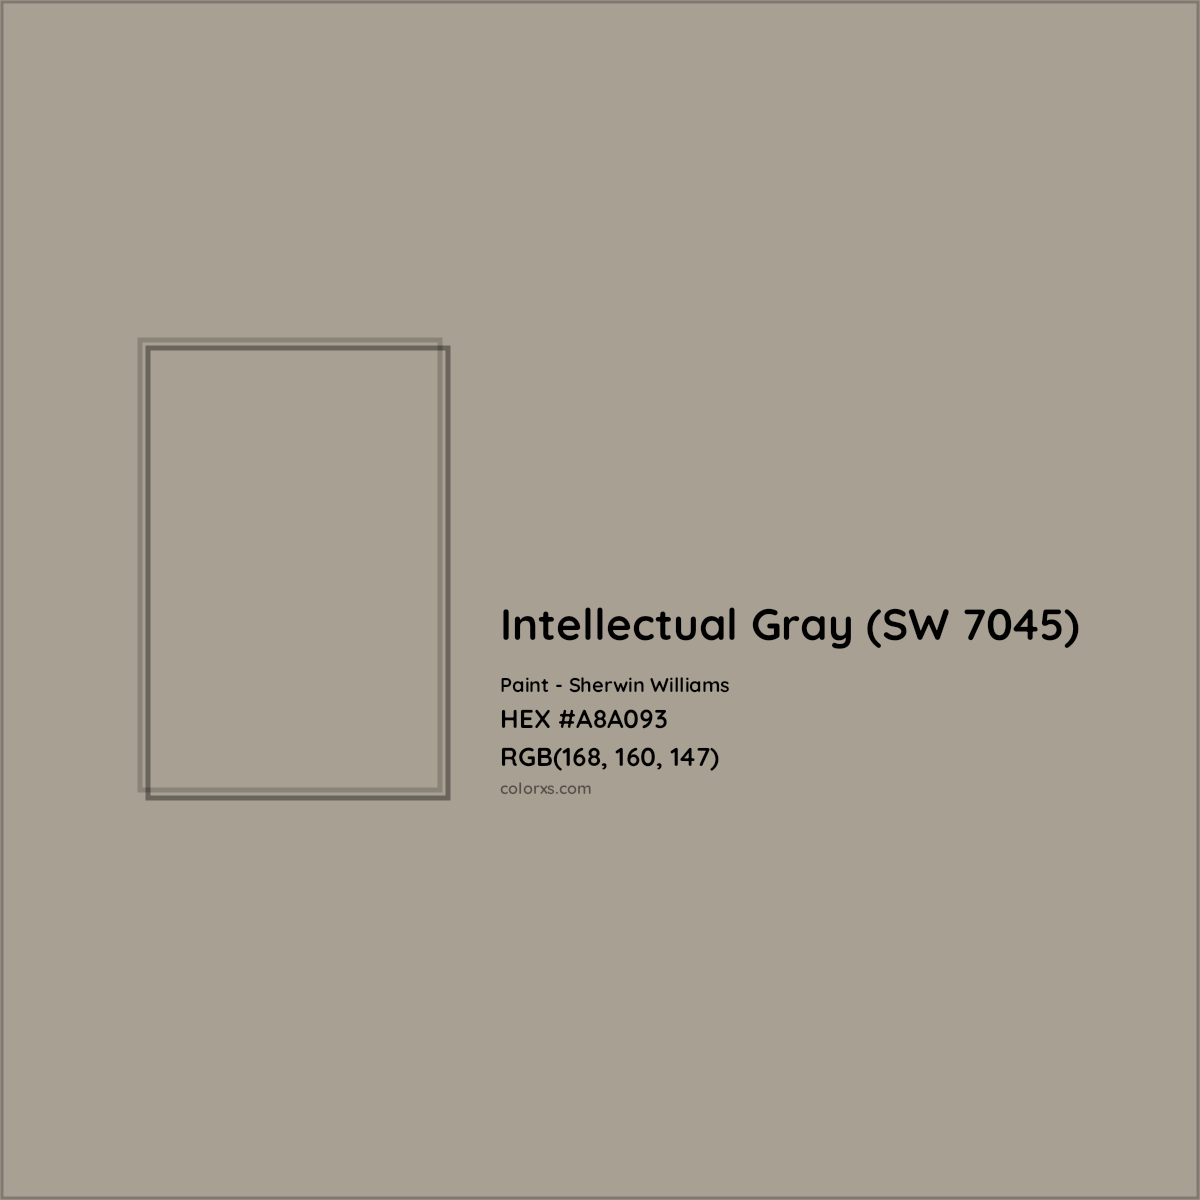 HEX #A8A093 Intellectual Gray (SW 7045) Paint Sherwin Williams - Color Code